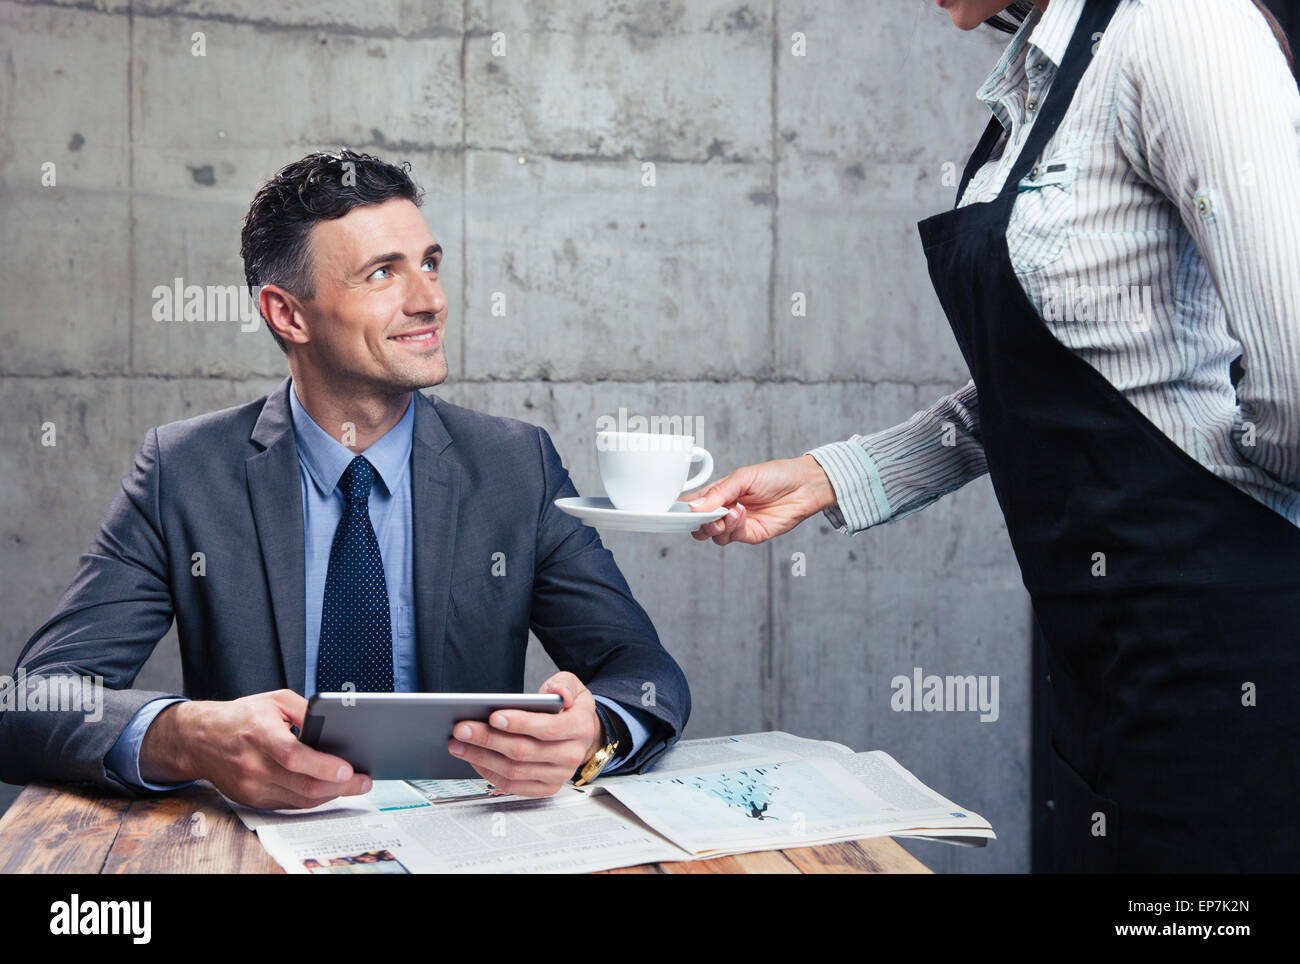 Waitress giving cup with coffee to happy man in suit at restaurant Stock Photo